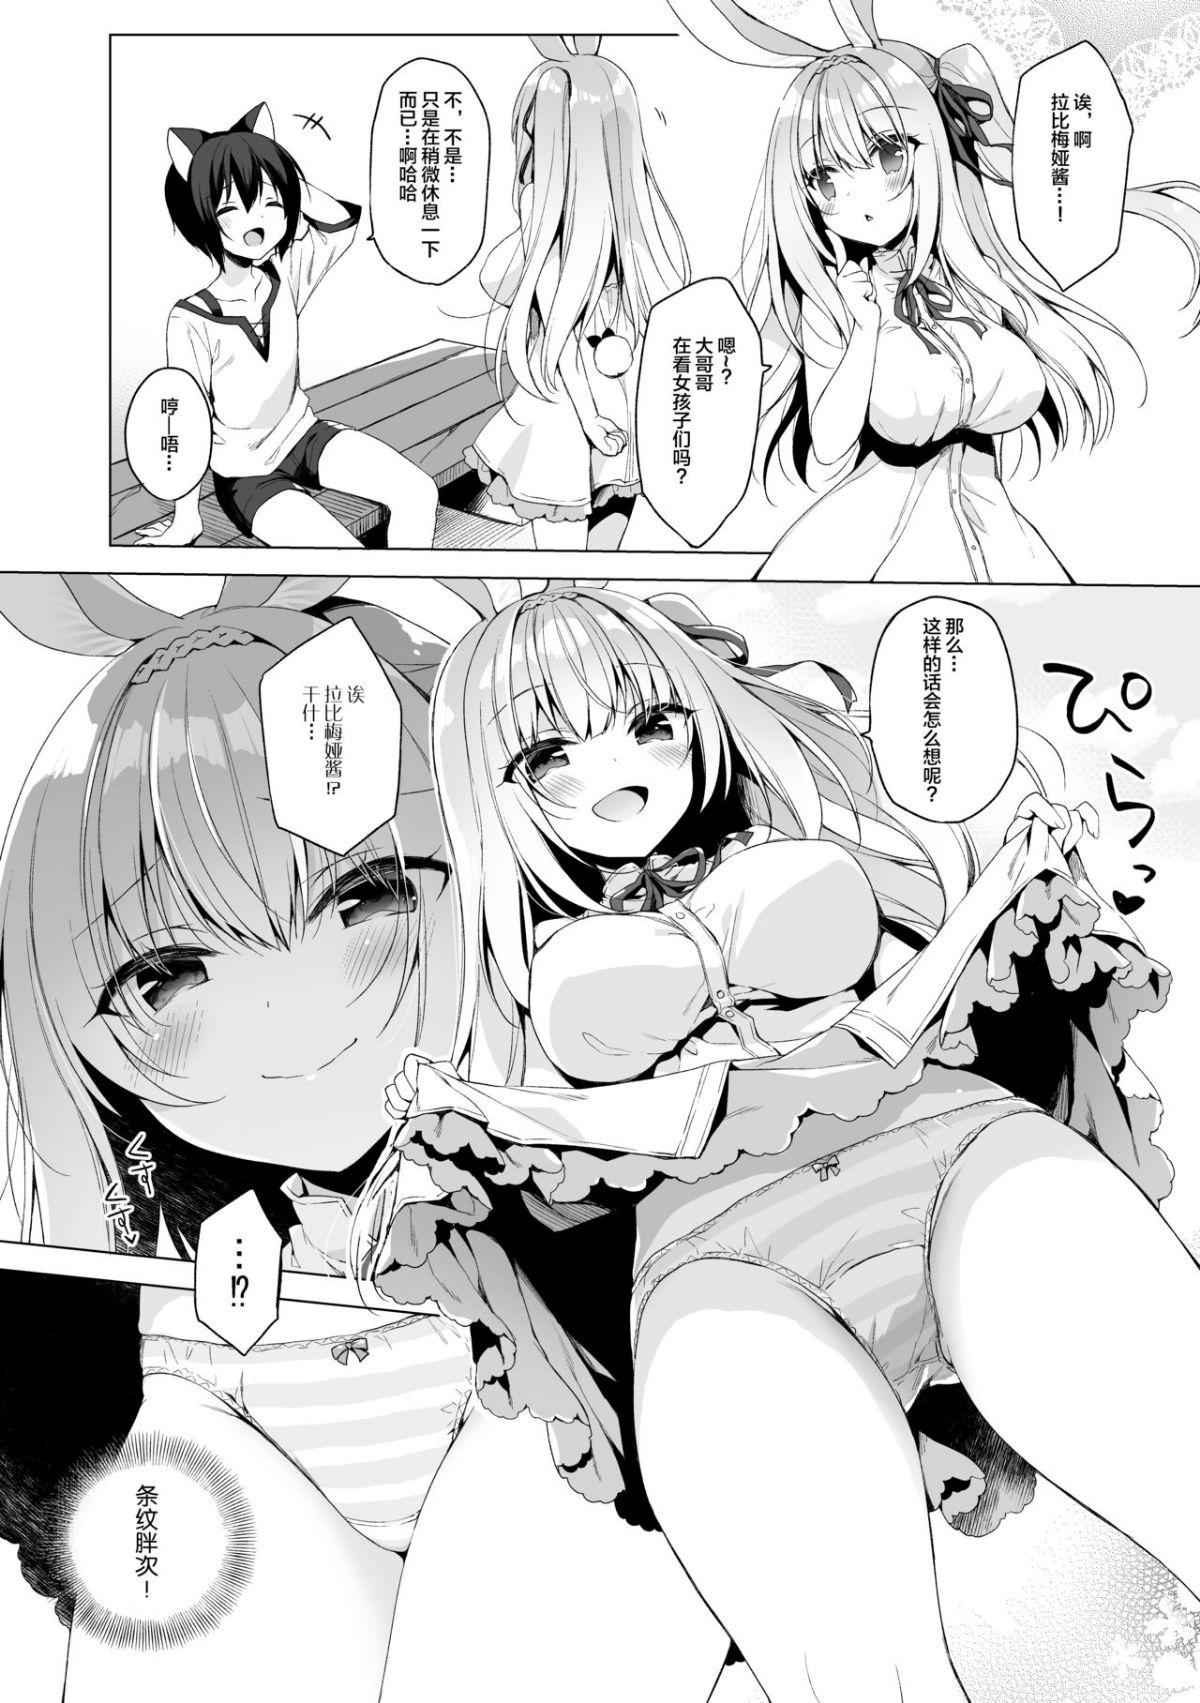 Camshow Boku no Risou no Isekai Seikatsu 6 | My Ideal Life in Another World 6 - Original From - Page 7